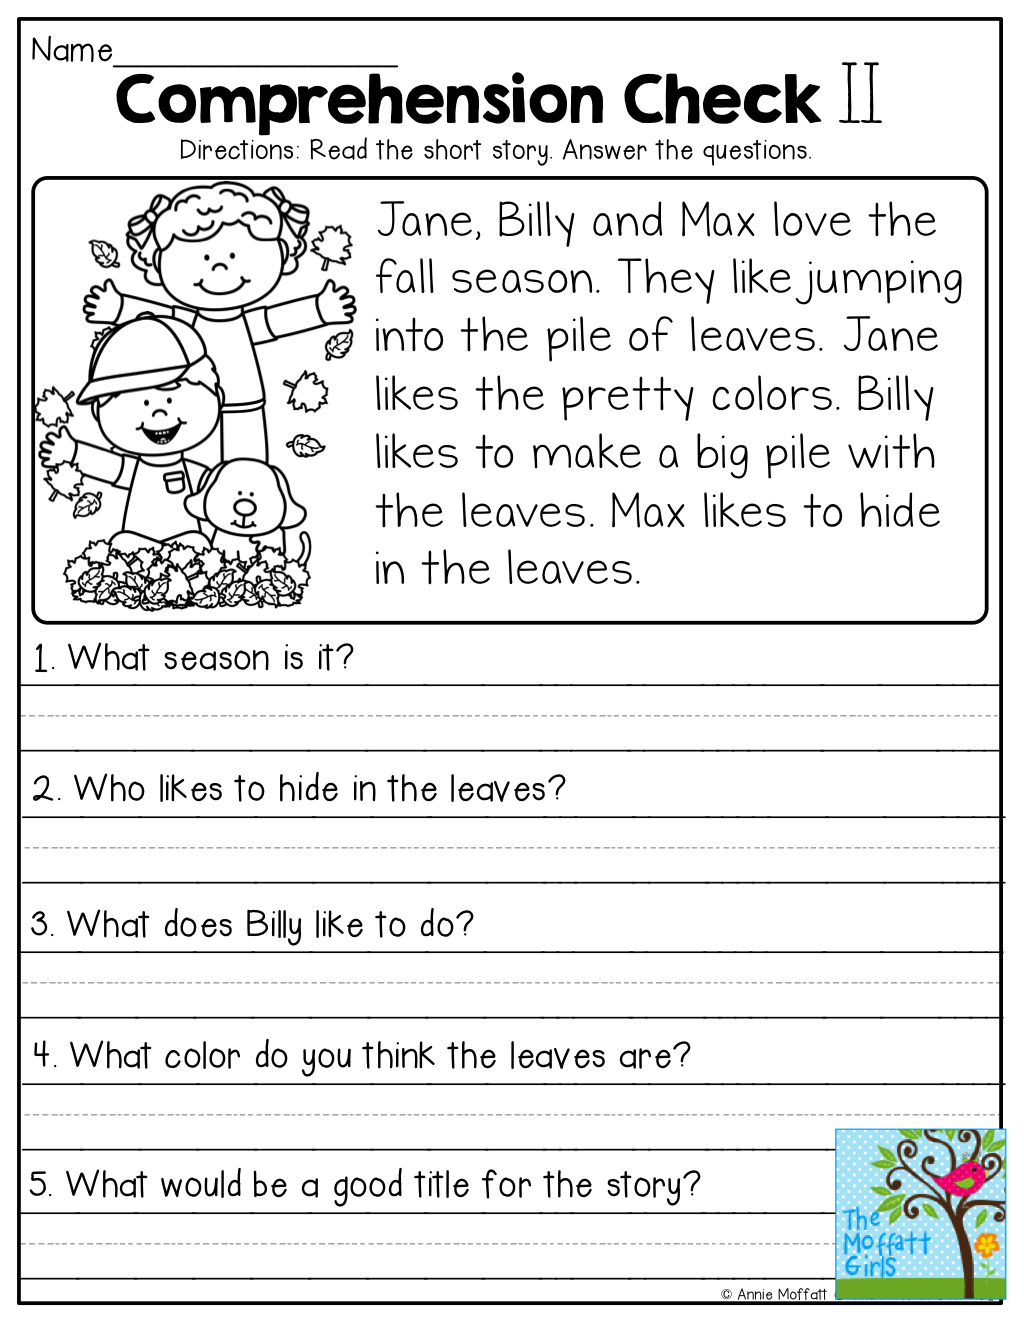 Comprehension Checks And So Many More Useful Printables! | Test Of - Free Printable Short Stories For 4Th Graders